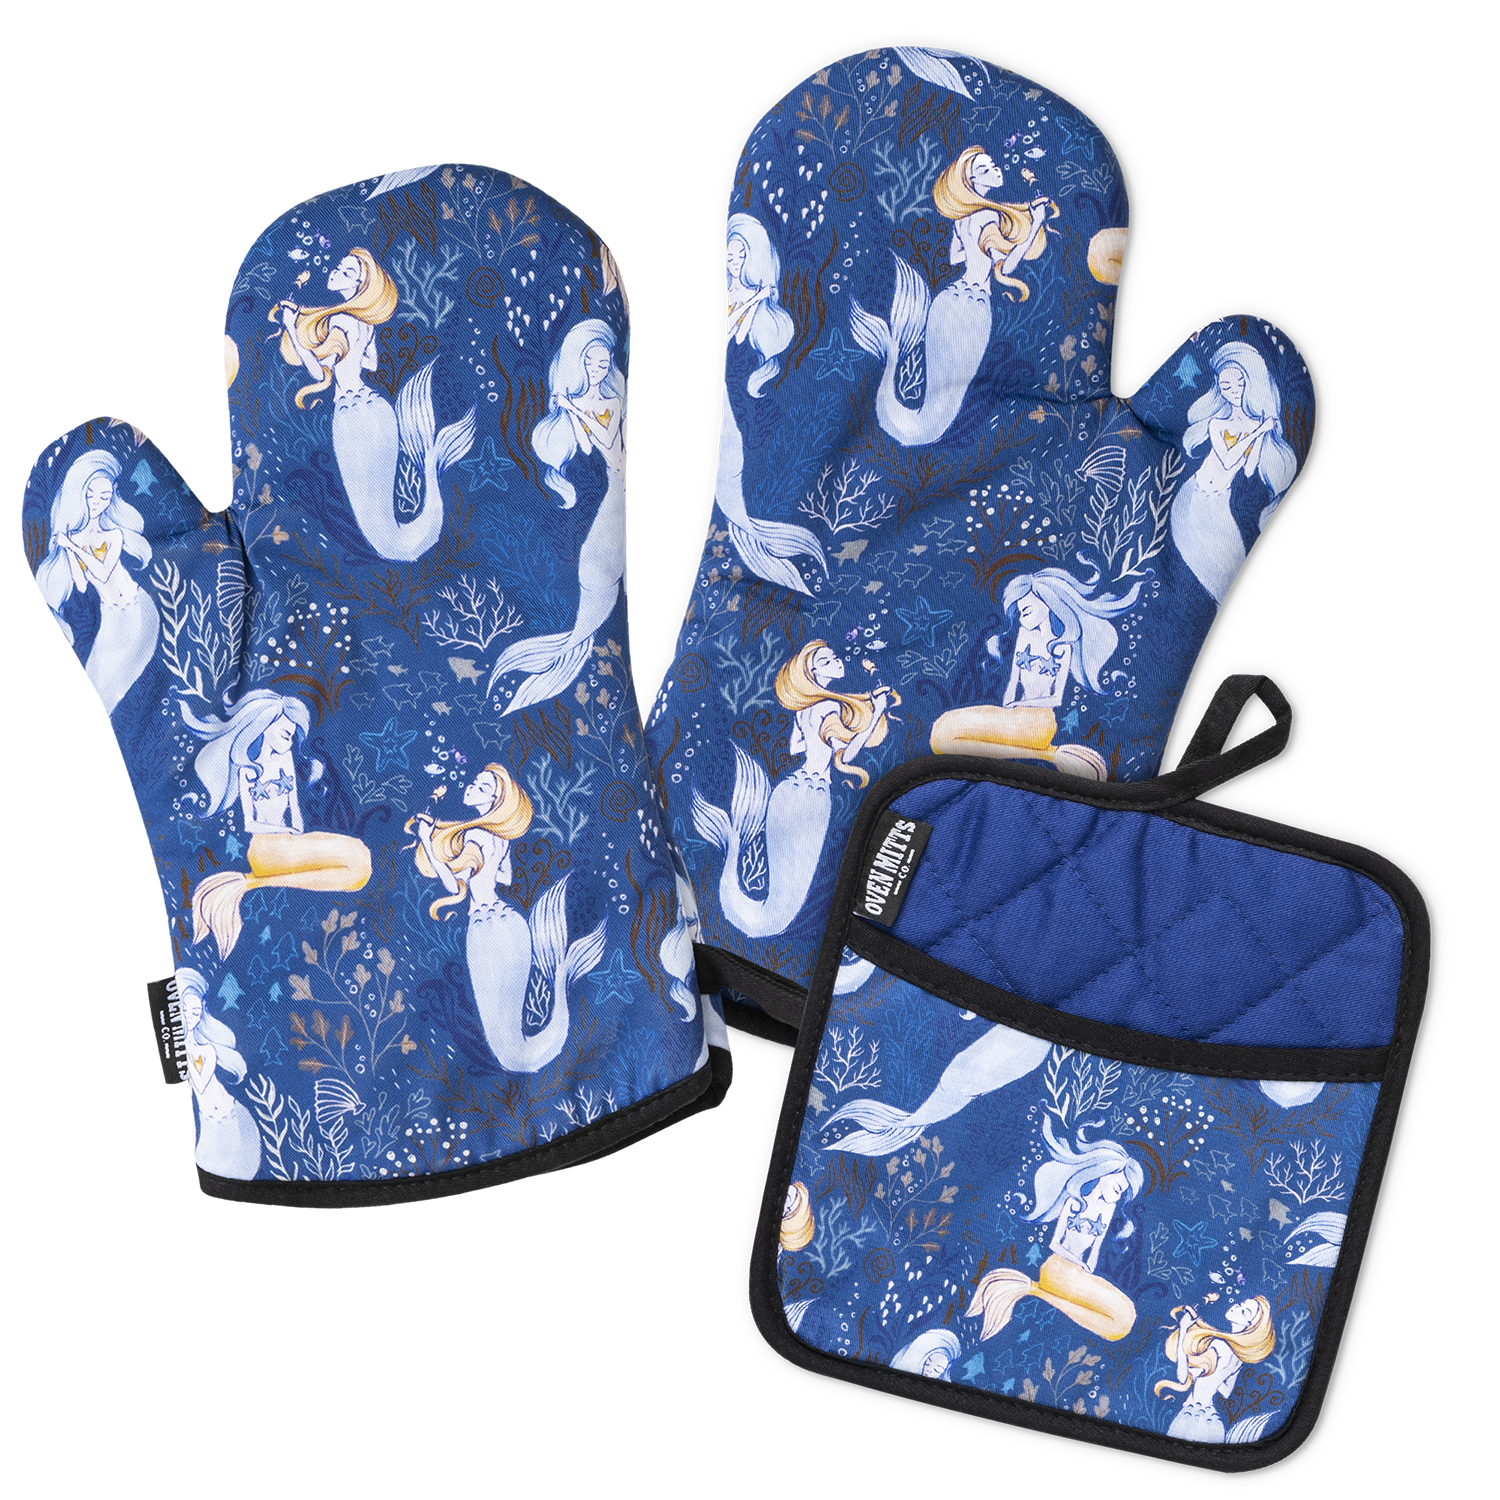 Magical Mermaid Blue Oven Mitts gloves And Potholder Set